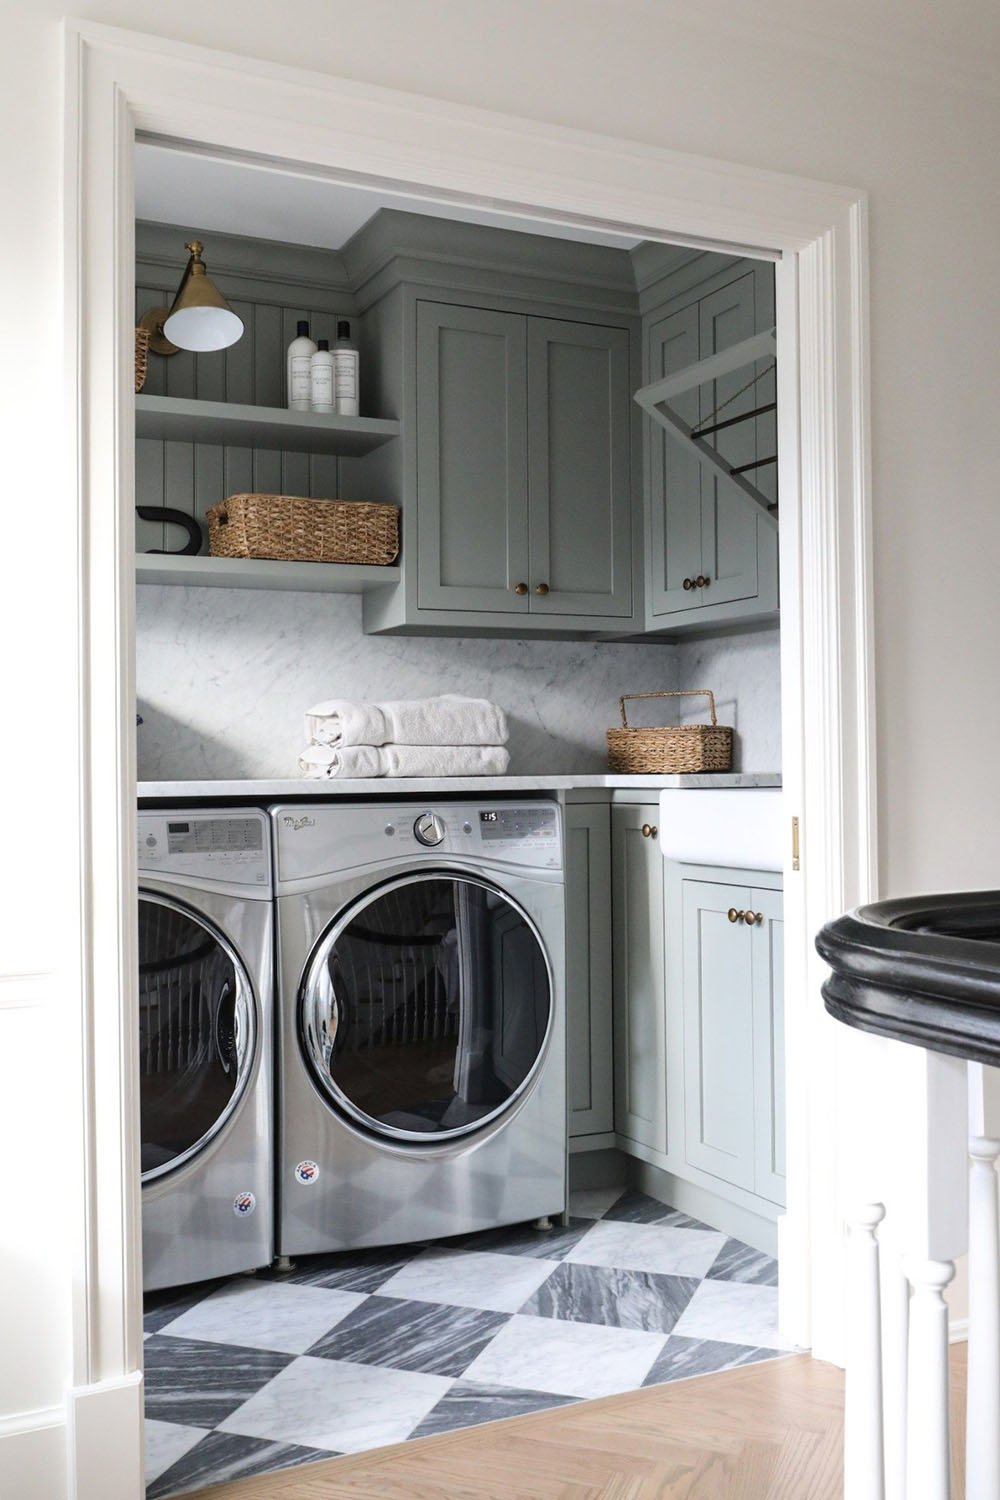 10 Pins : Laundry Room Edition - roomfortuesday.com